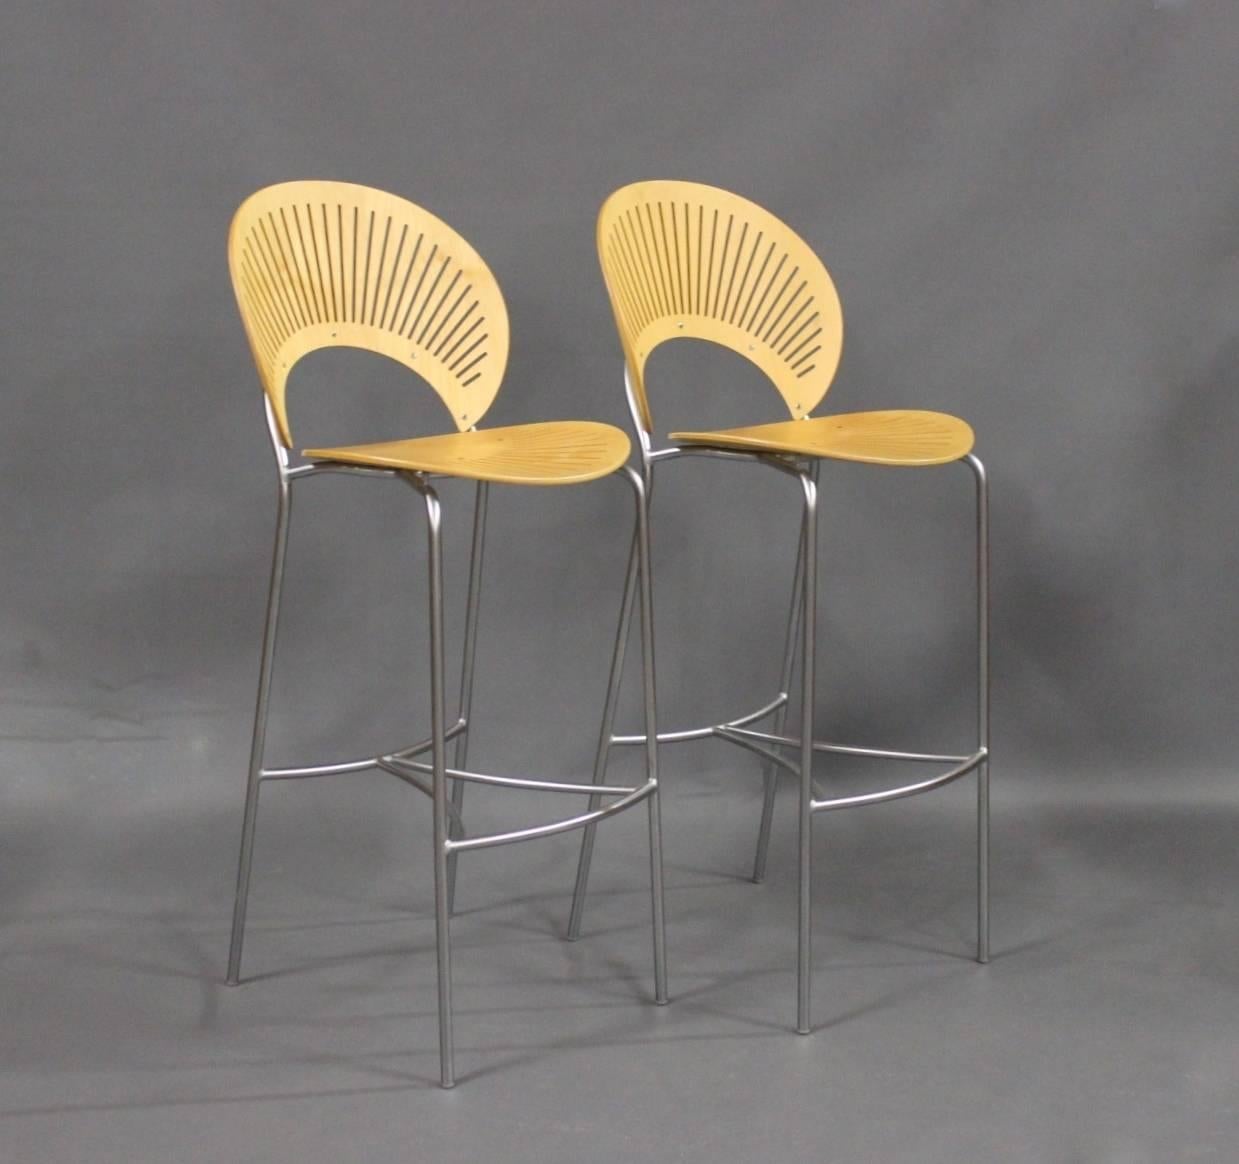 A set of Trinidad stools in Birch and with frame in chrome. The stools was designed by Nanna Ditzel in 1998 and manufactured by Fredericia furniture. Model no. 3300 and serial no. 1002.